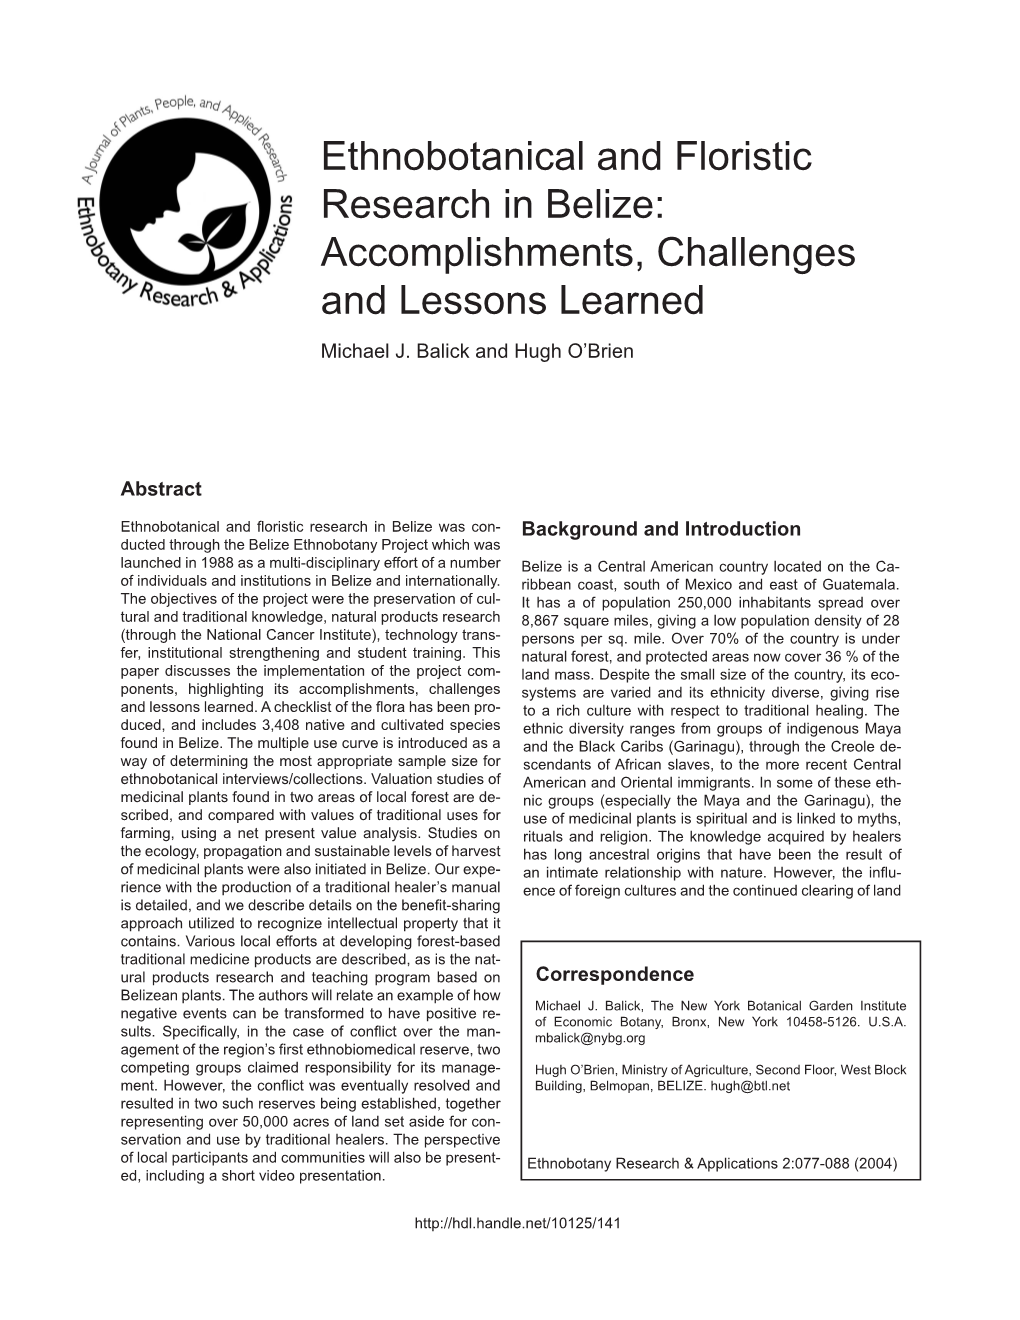 Ethnobotanical and Floristic Research in Belize: Accomplishments, Challenges and Lessons Learned Michael J